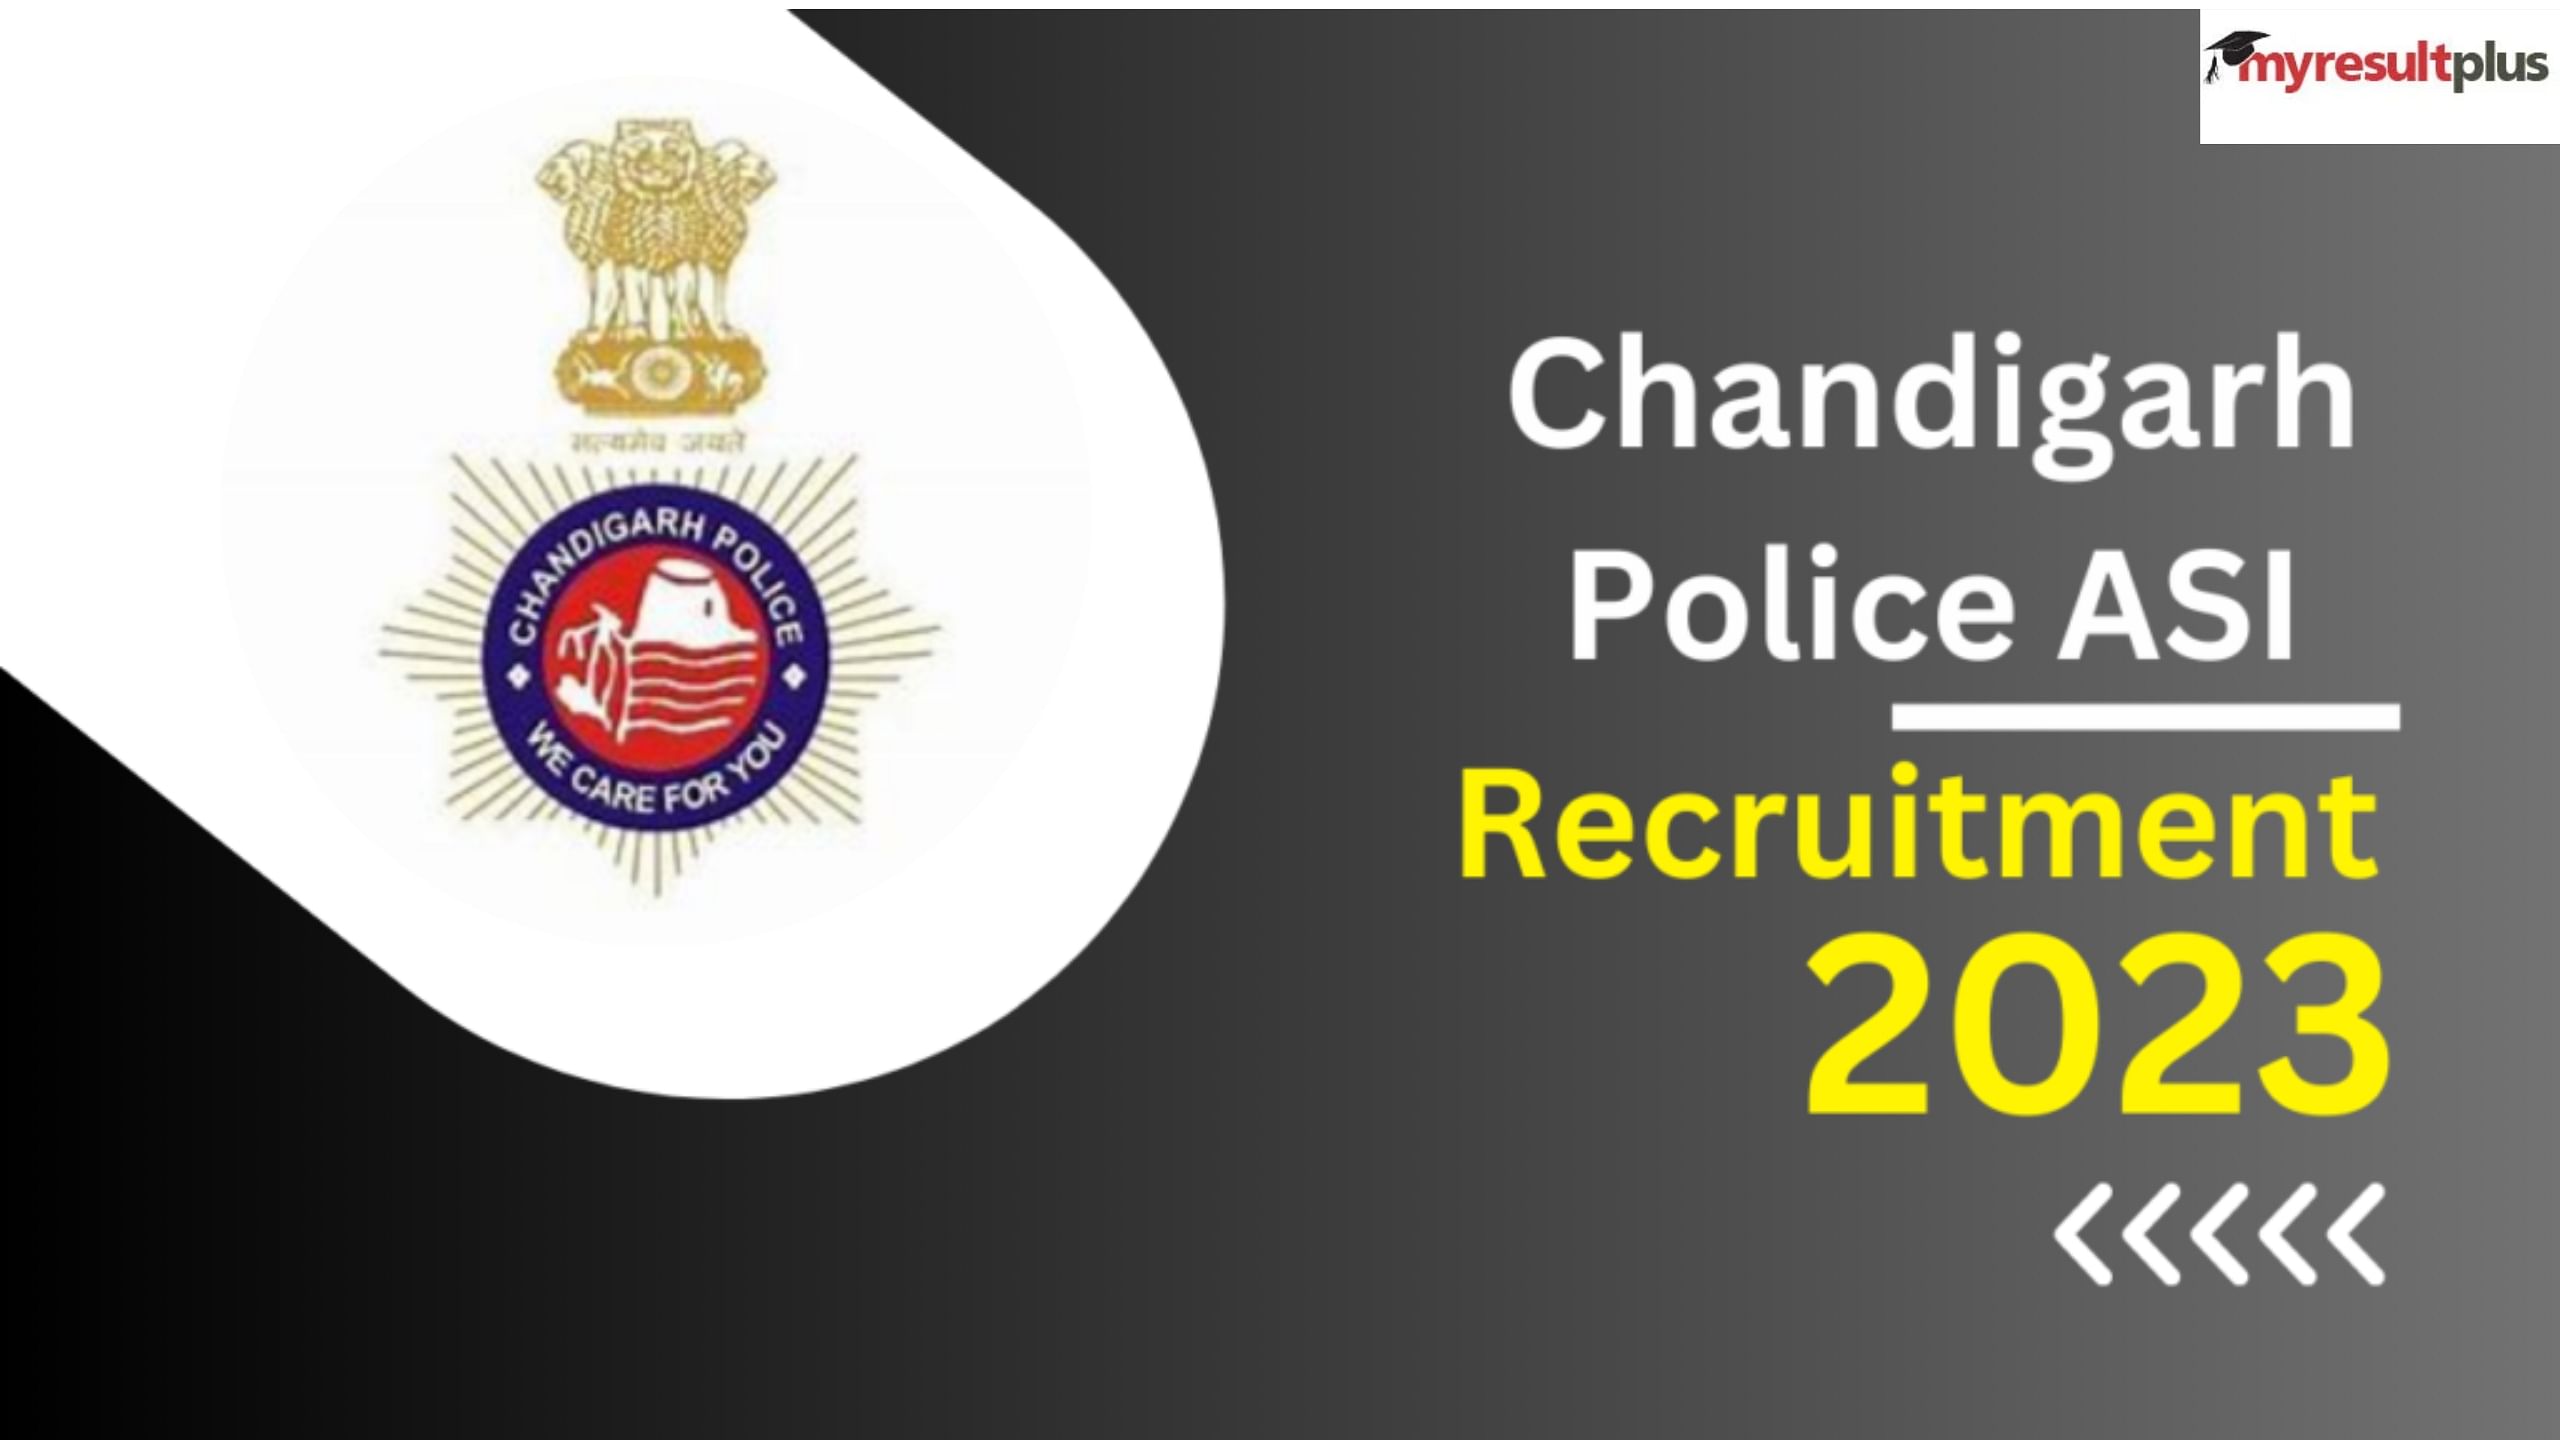 Chandigarh Police ASI 2023: Exam Date Announced, Admit Card Soon at chandigarhpolice.gov.in